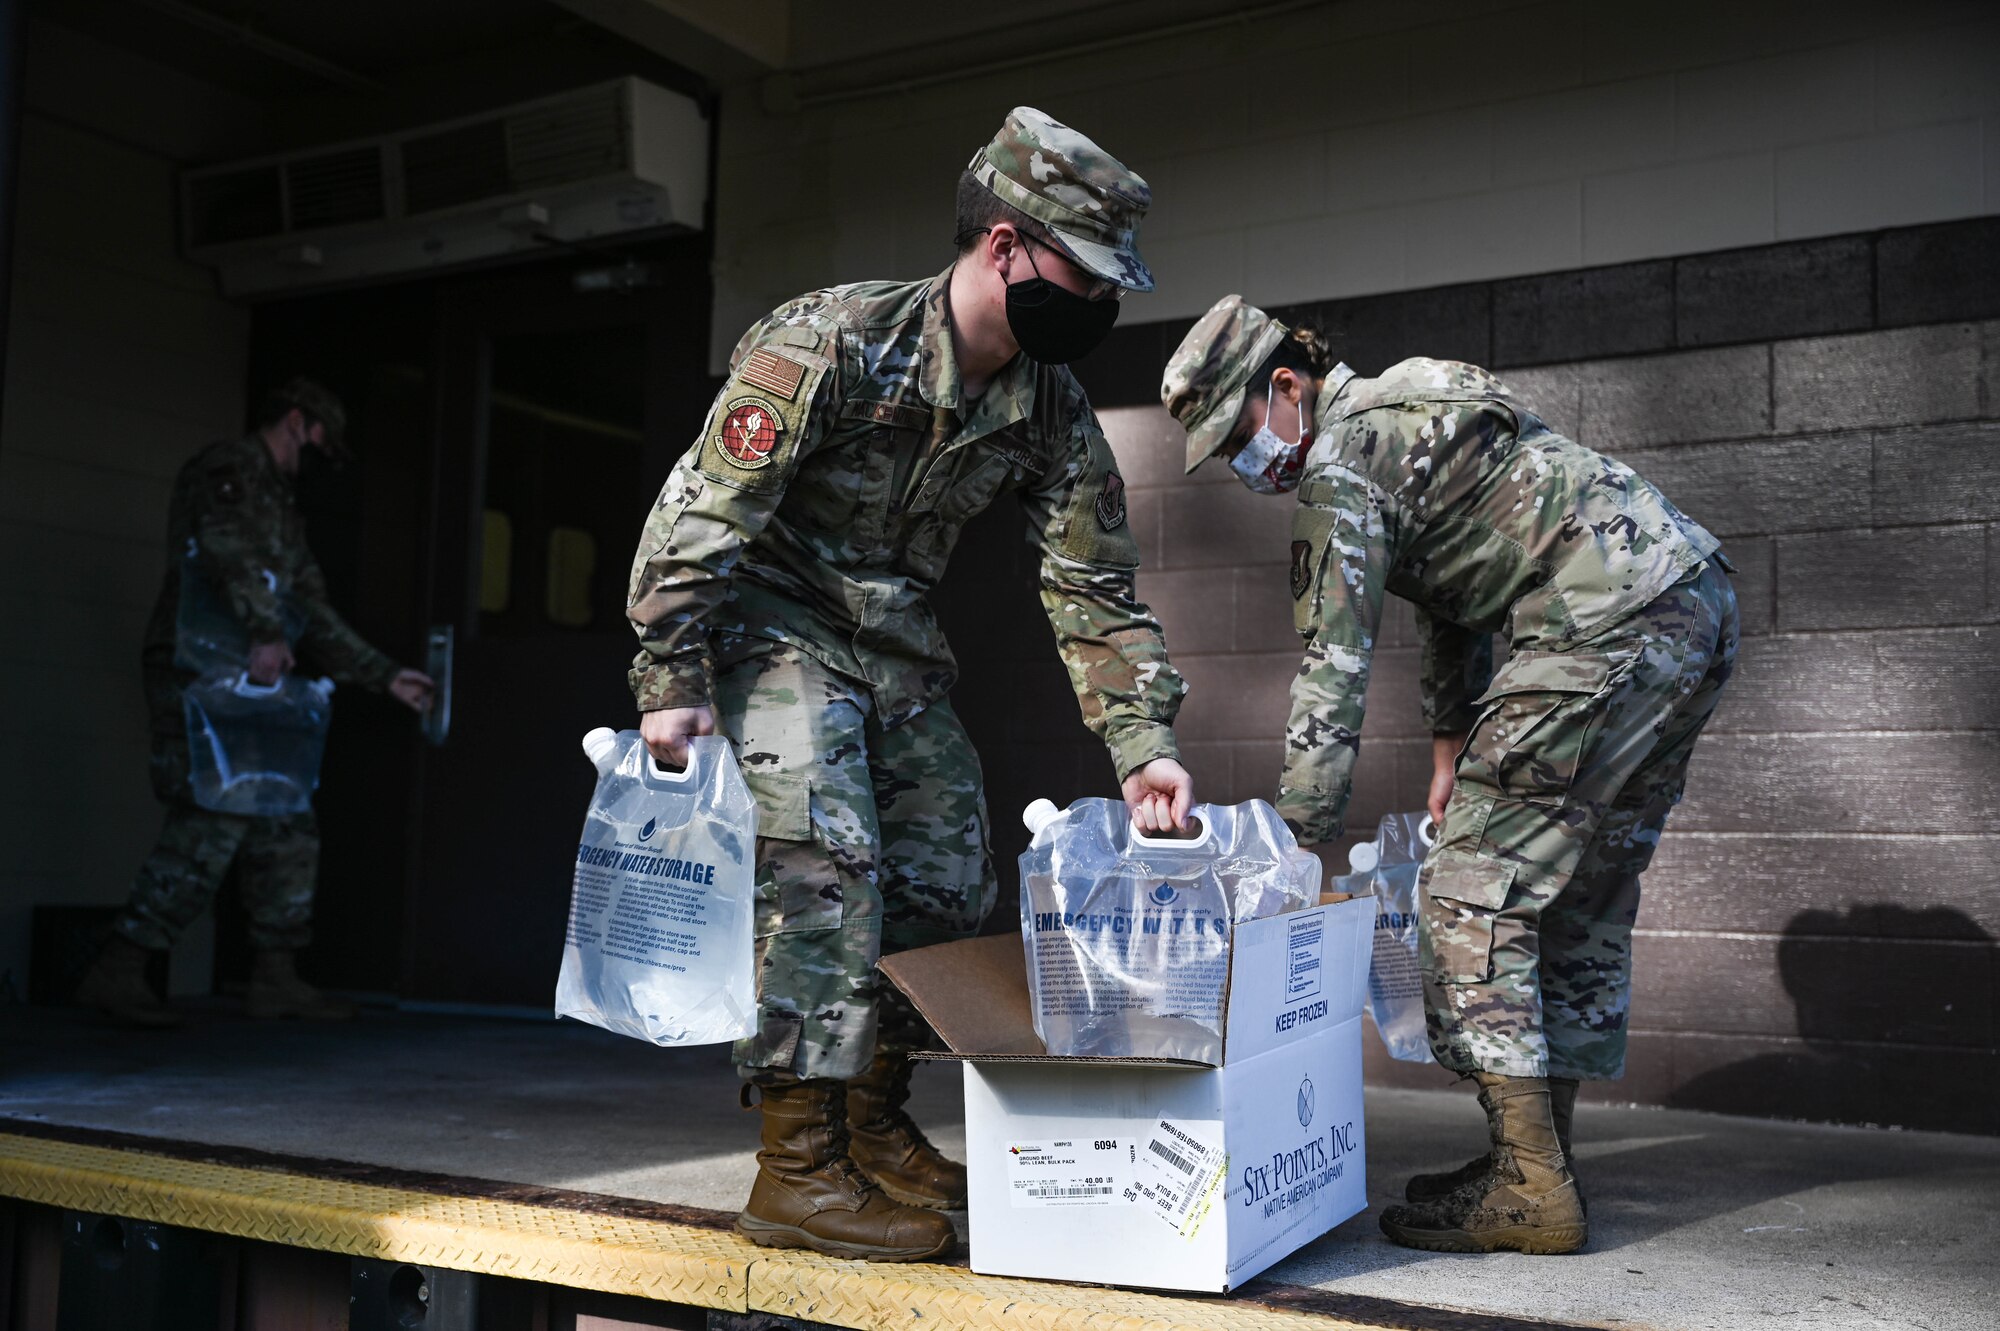 Staff Sgt. Sarah Sanez, 647th Force Support Squadron food service supervisor, Airman 1st Class Jacob MacKenzie and Senior Airman Joseph McCabe, 647th FSS food service journeymen, transport potable water into the Hale Aina Dining Facility at Joint Base Pearl Harbor-Hickam, Hawaii, Dec. 16, 2021. An estimated 80 gallons of potable water is used per day at the facility as a precautionary measure. Night-shift food service personnel are responsible for refilling all water containers before the end of their shift, ensuring the day-shift personnel are readily available to cook on arrival the following day. (U.S. Air Force photo by Staff Sgt. Alan Ricker)